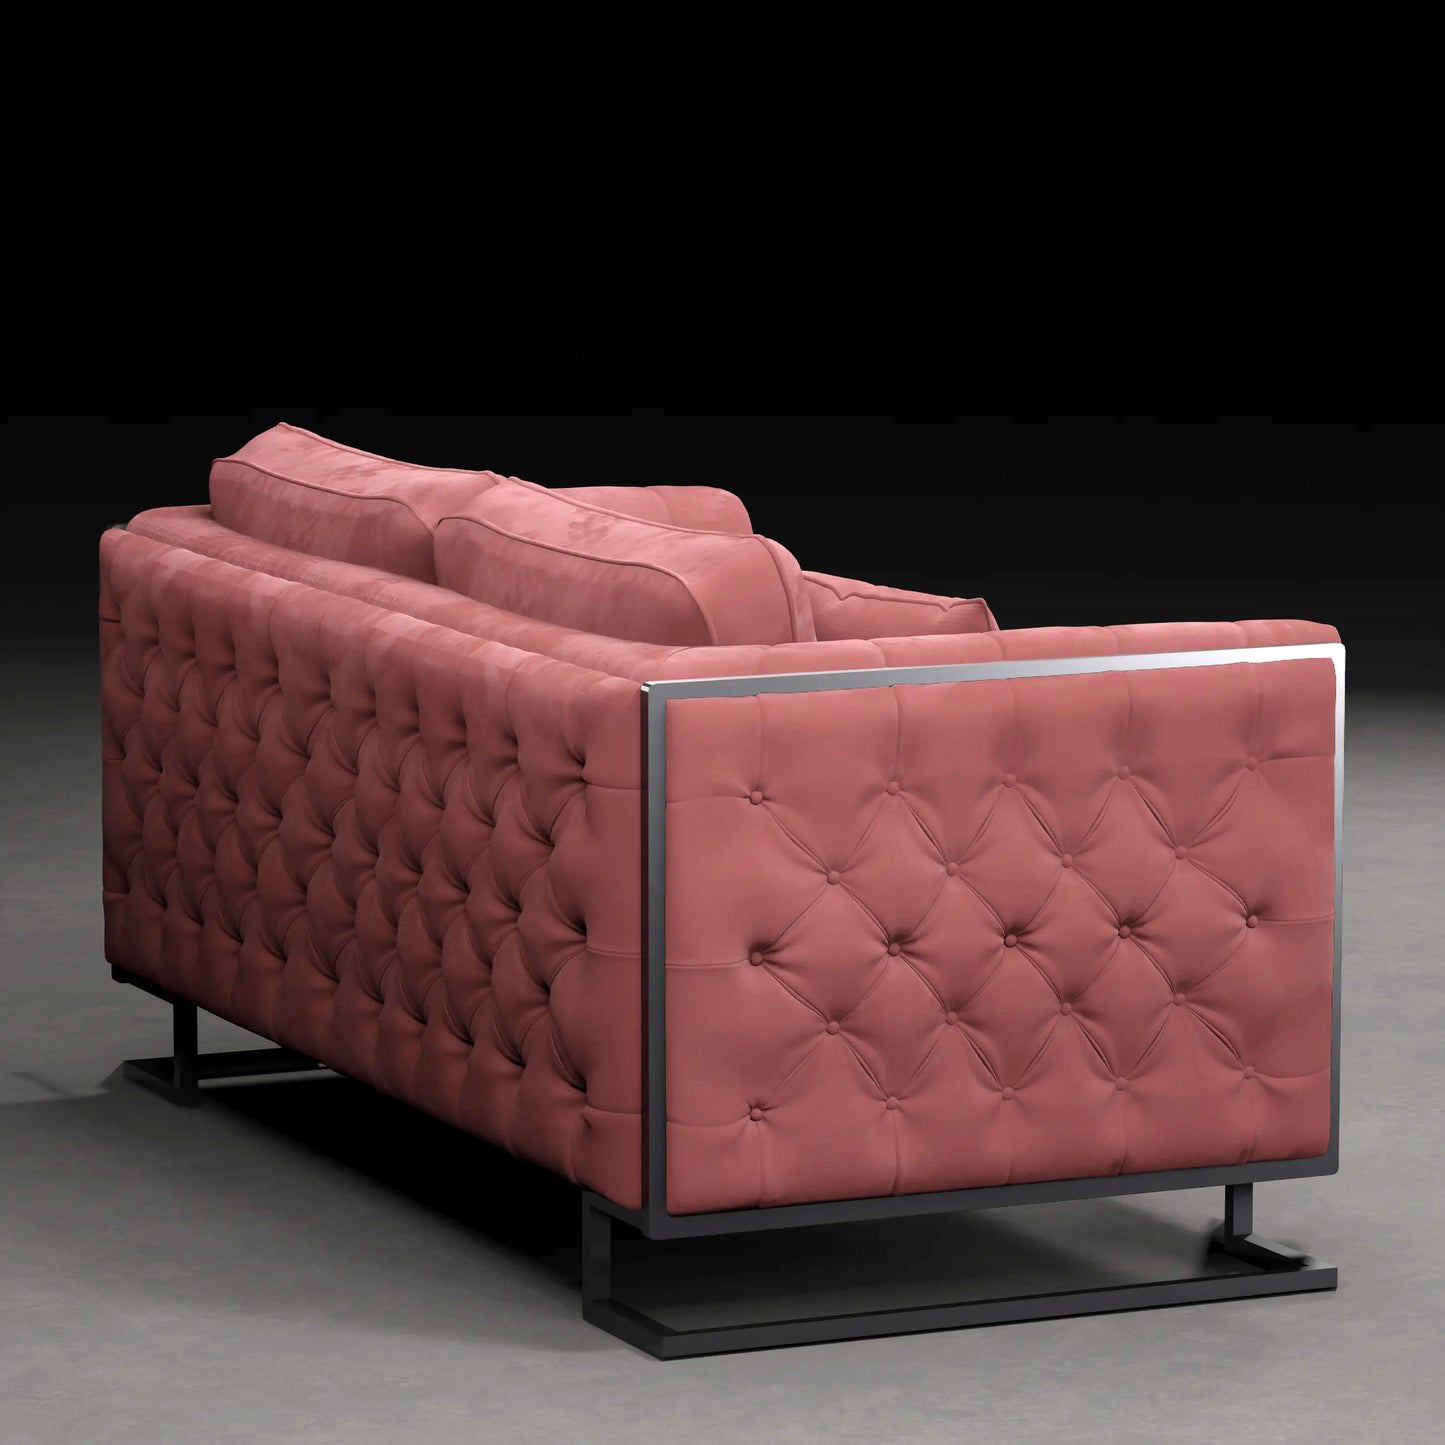 CAROLINA -  2 Seater Couch in Velvet Finish | Pink Colour